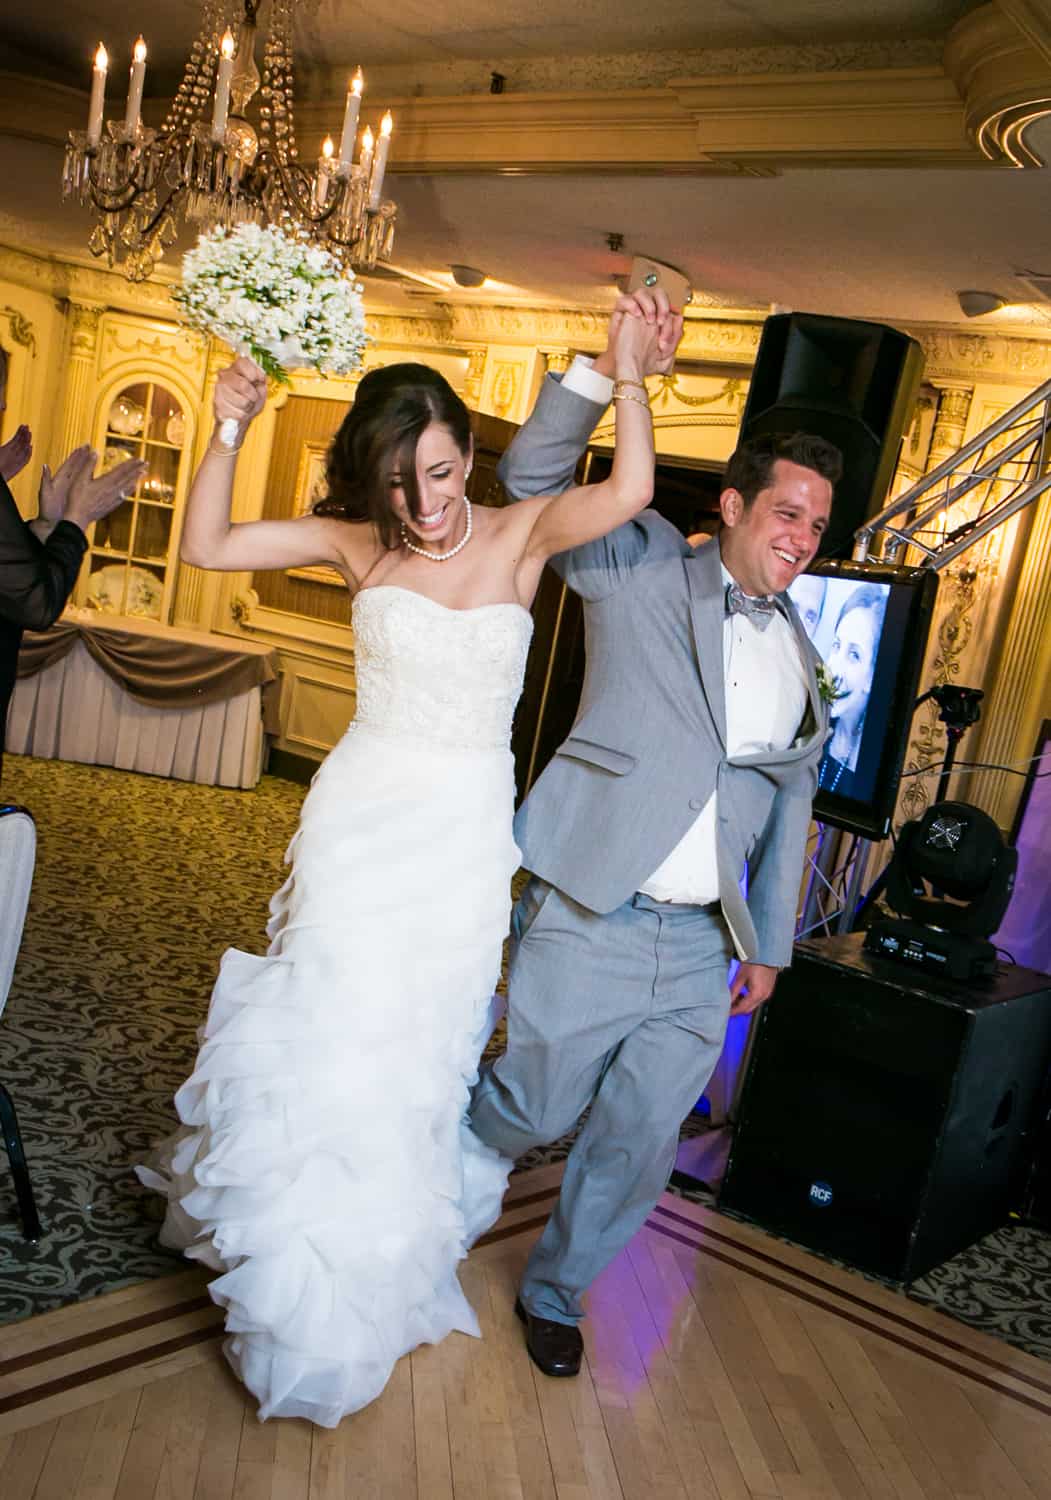 Bride and groom dancing as they enter reception